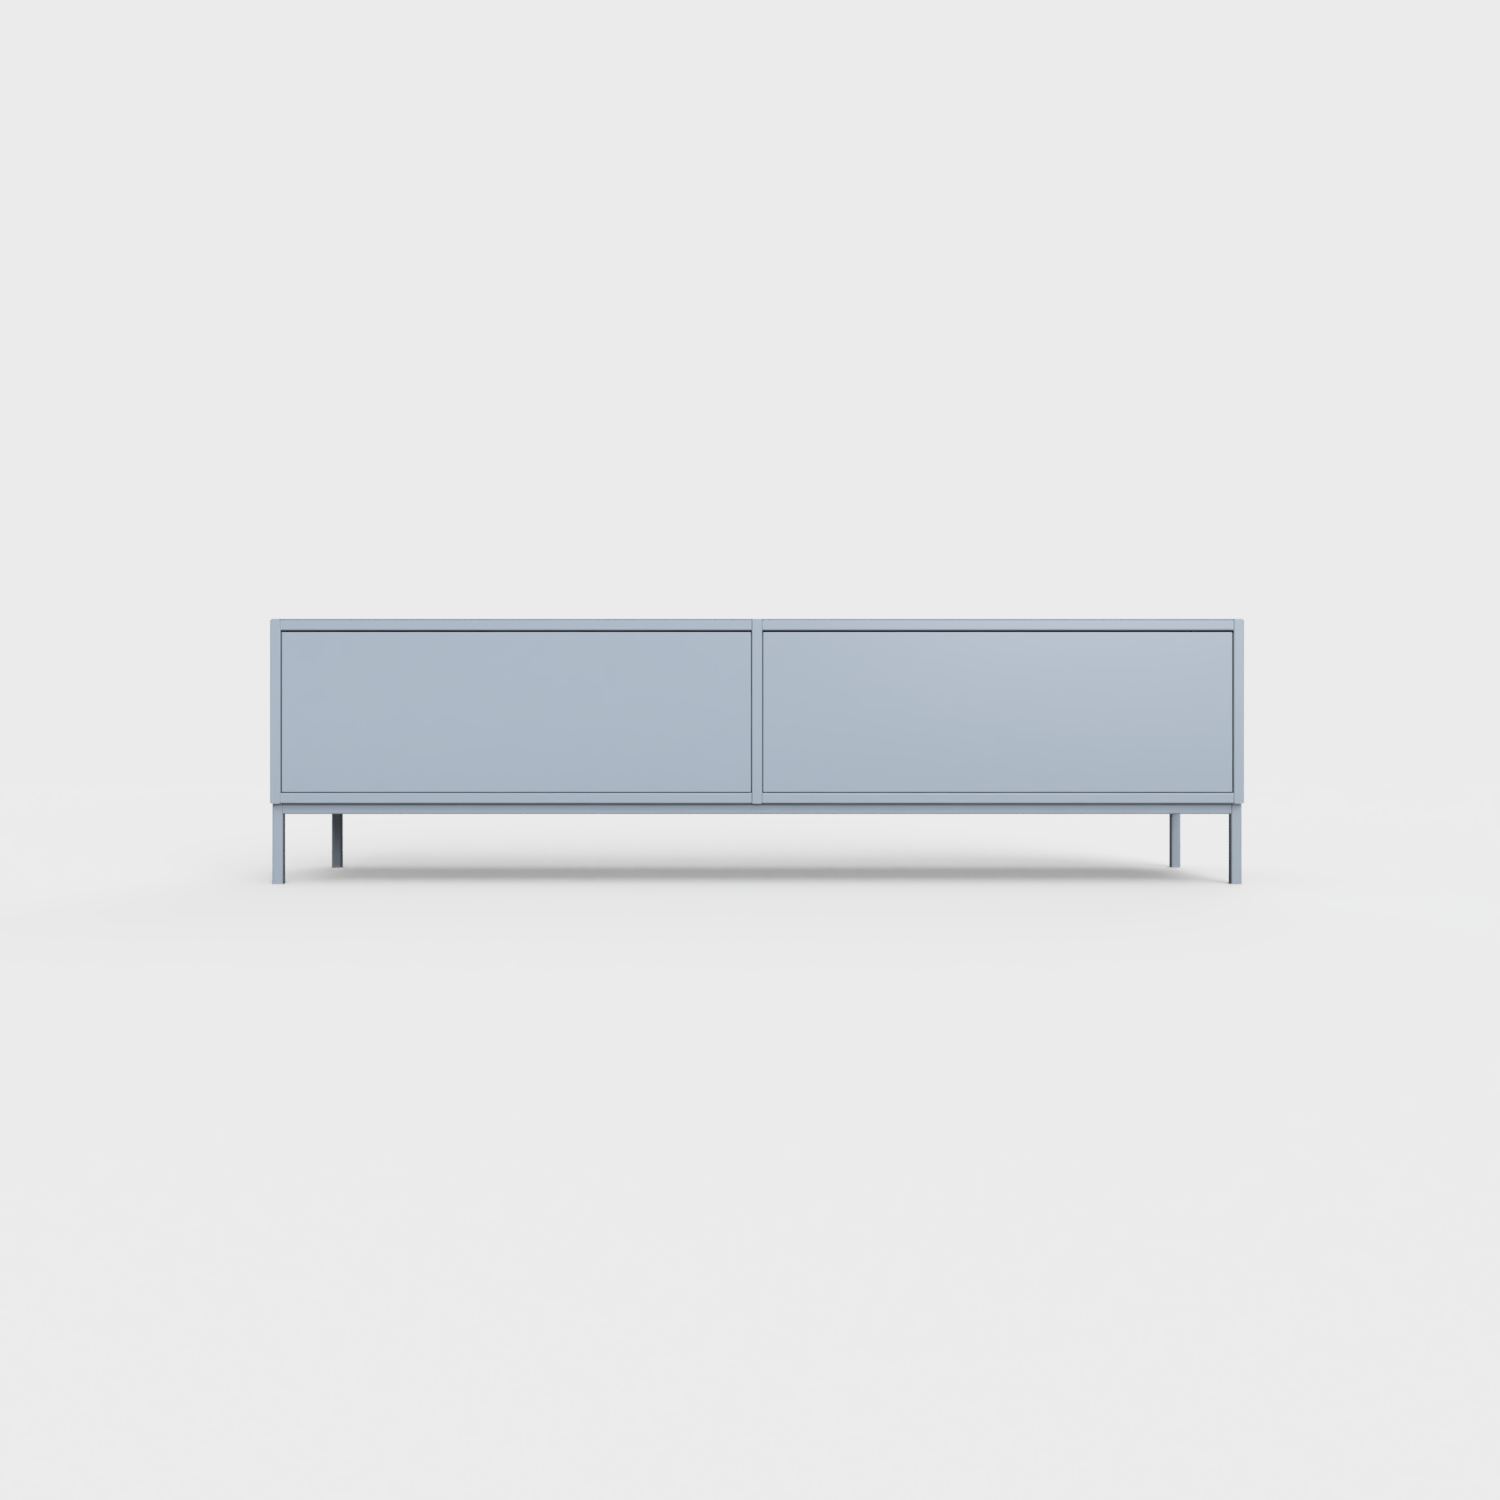 Prunus 01 Lowboard in Pigeon Blue color, powder-coated steel, elegant and modern piece of furniture for your living room